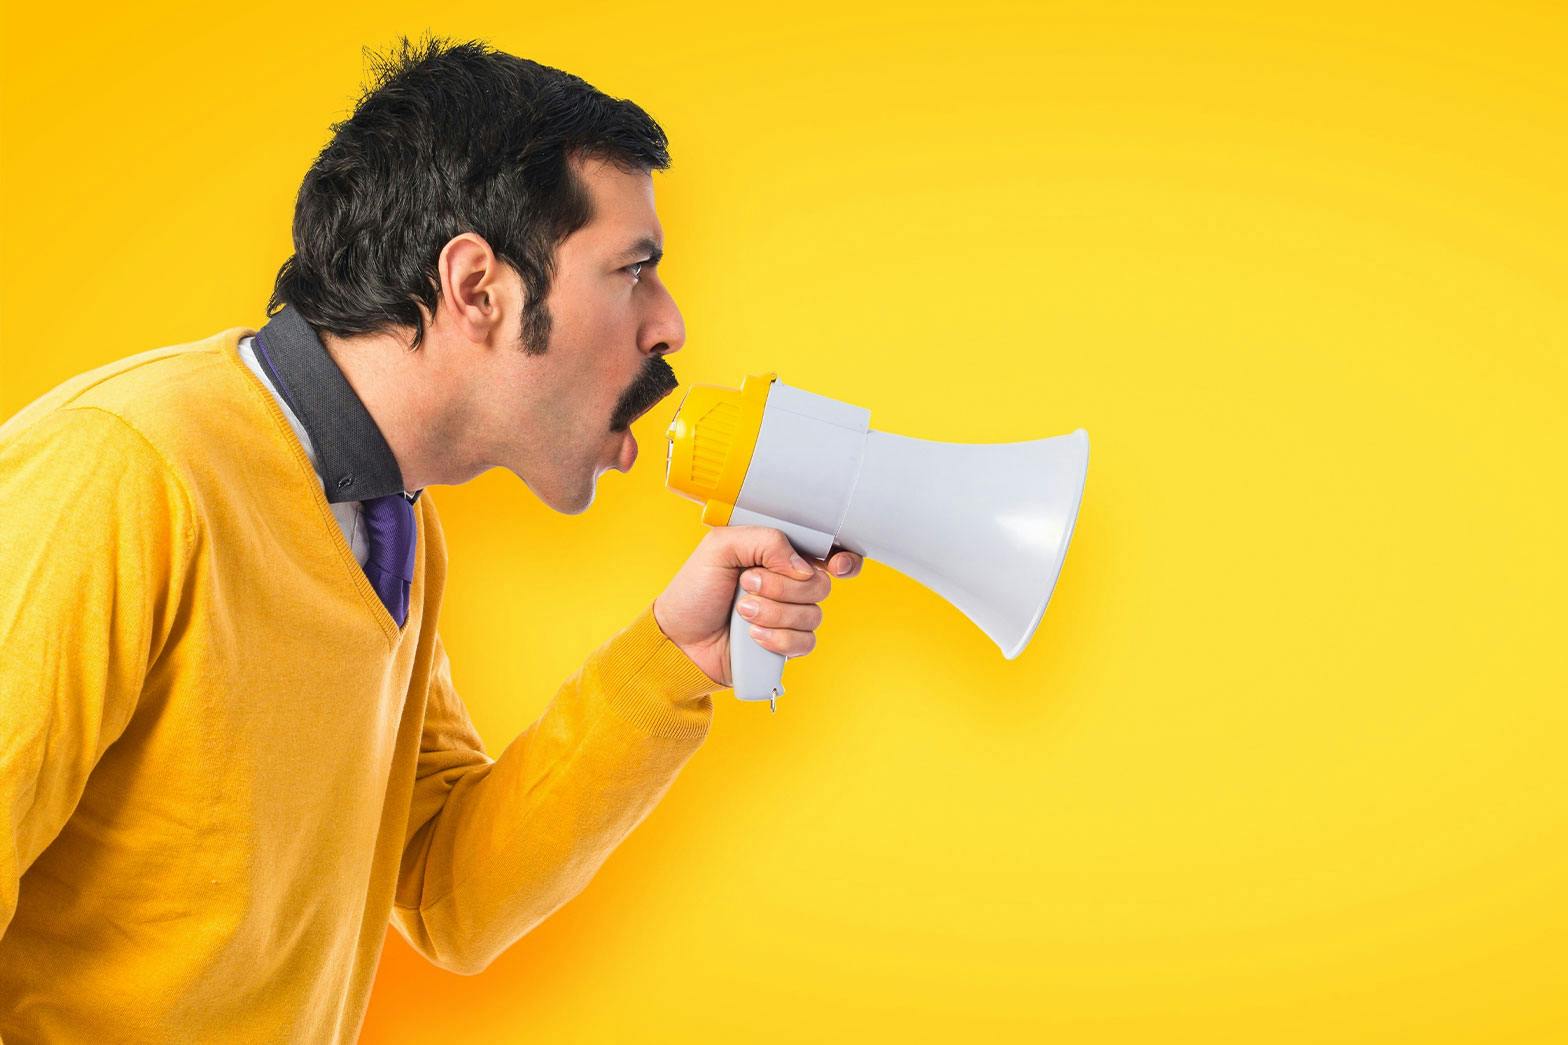 A man in yellow yelling in to a megaphone